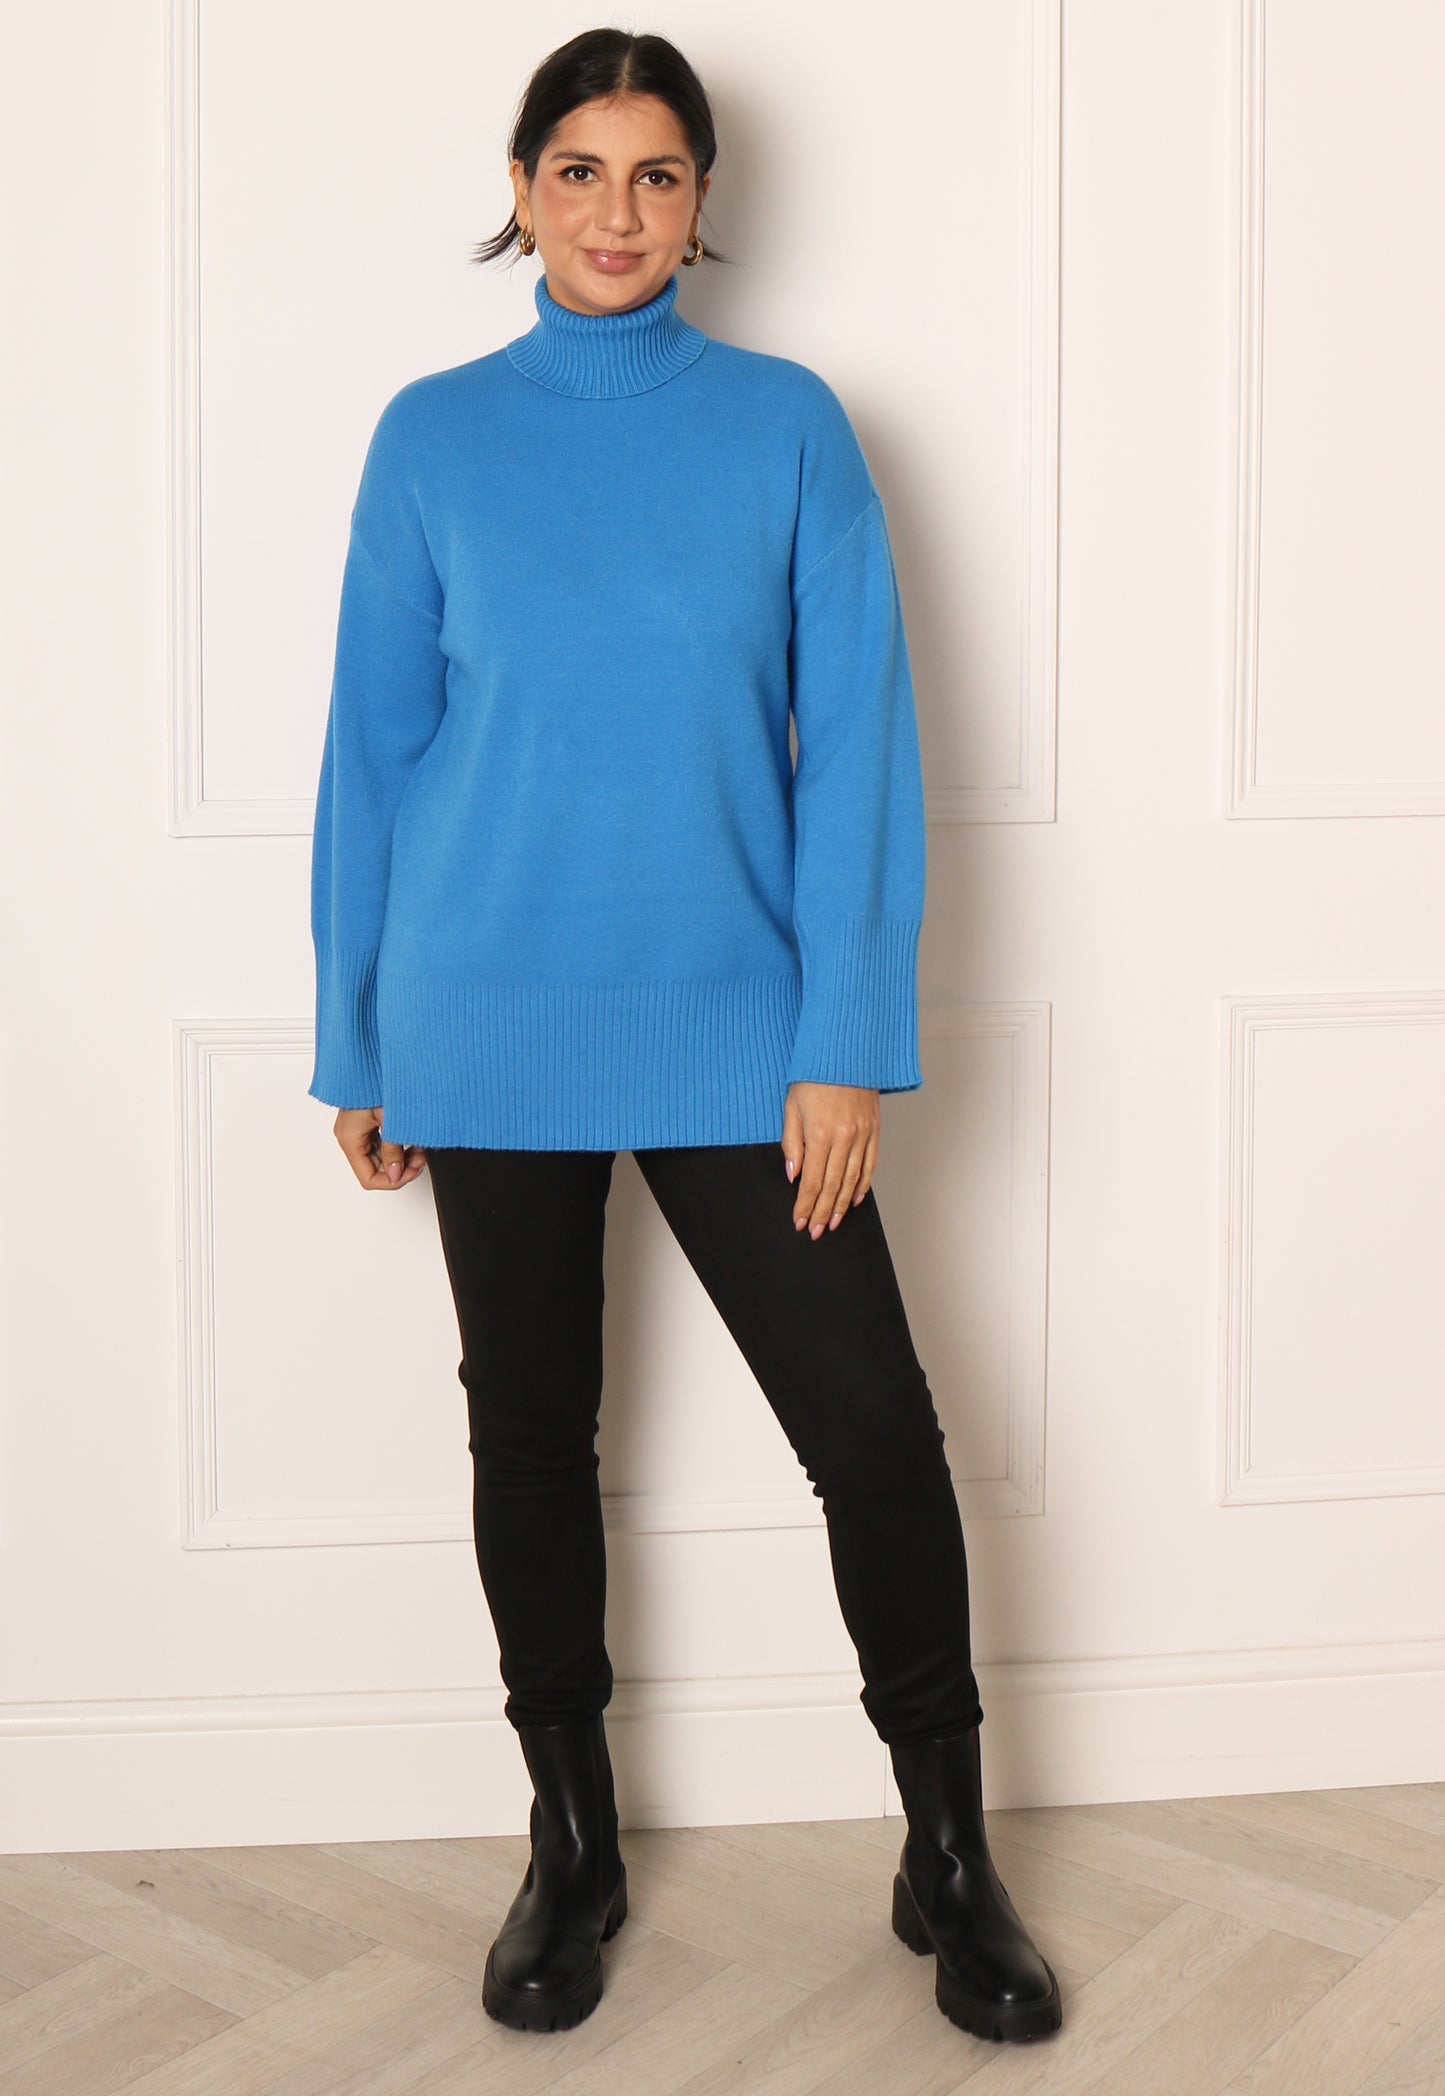 VERO MODA Gold Soft Knit Rollneck Longline Jumper with Side Splits in  French Blue  One Nation Clothing VERO MODA Gold Soft Knit Rollneck Longline  Jumper with Side Splits in